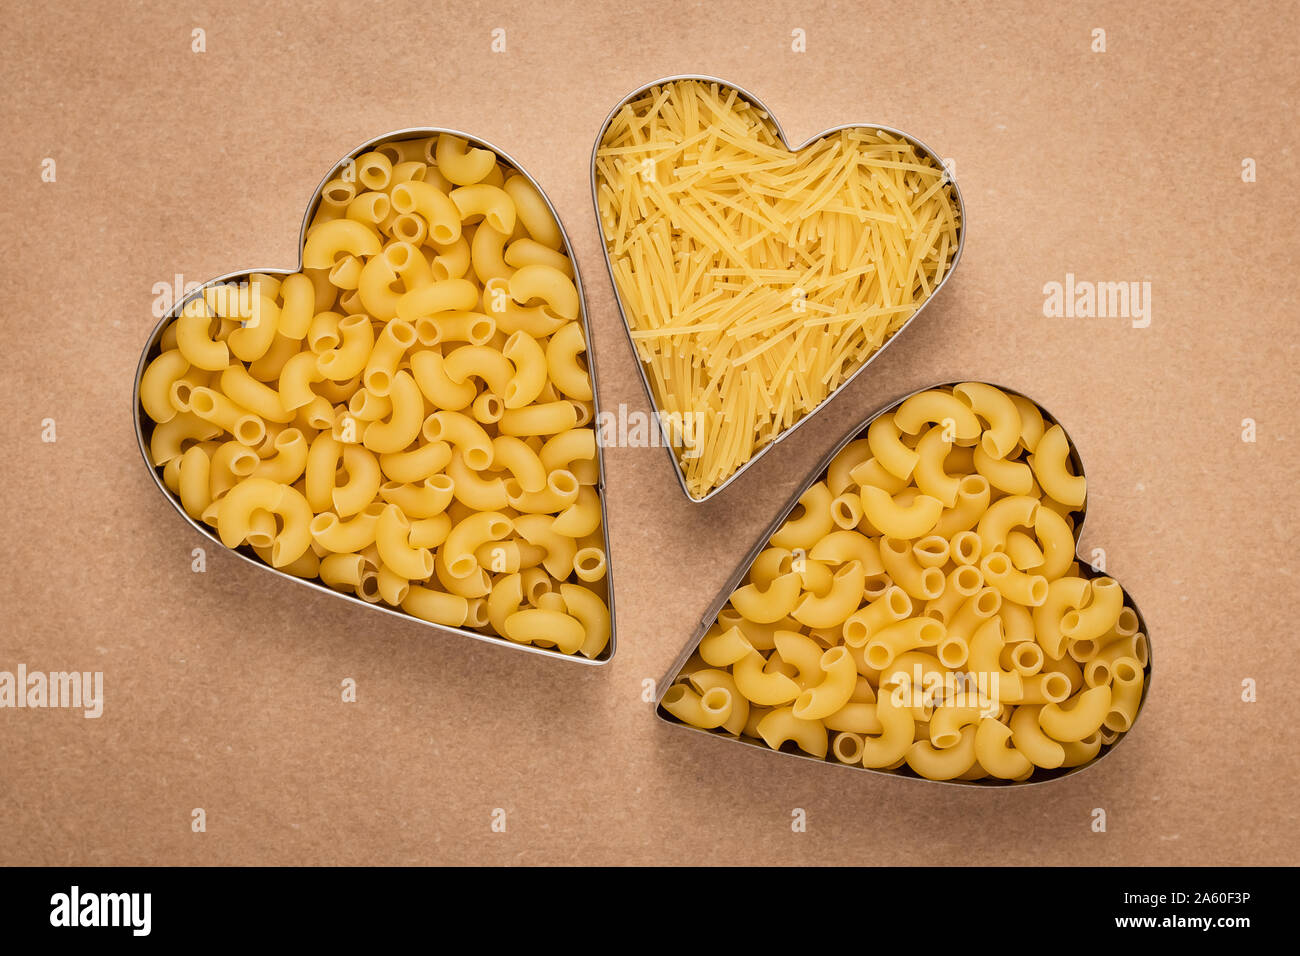 https://c8.alamy.com/comp/2A60F3P/three-hearts-of-pasta-on-brown-paper-background-art-design-vintage-parchment-shape-of-heart-symbol-of-love-heap-of-uncooked-macaroni-2A60F3P.jpg